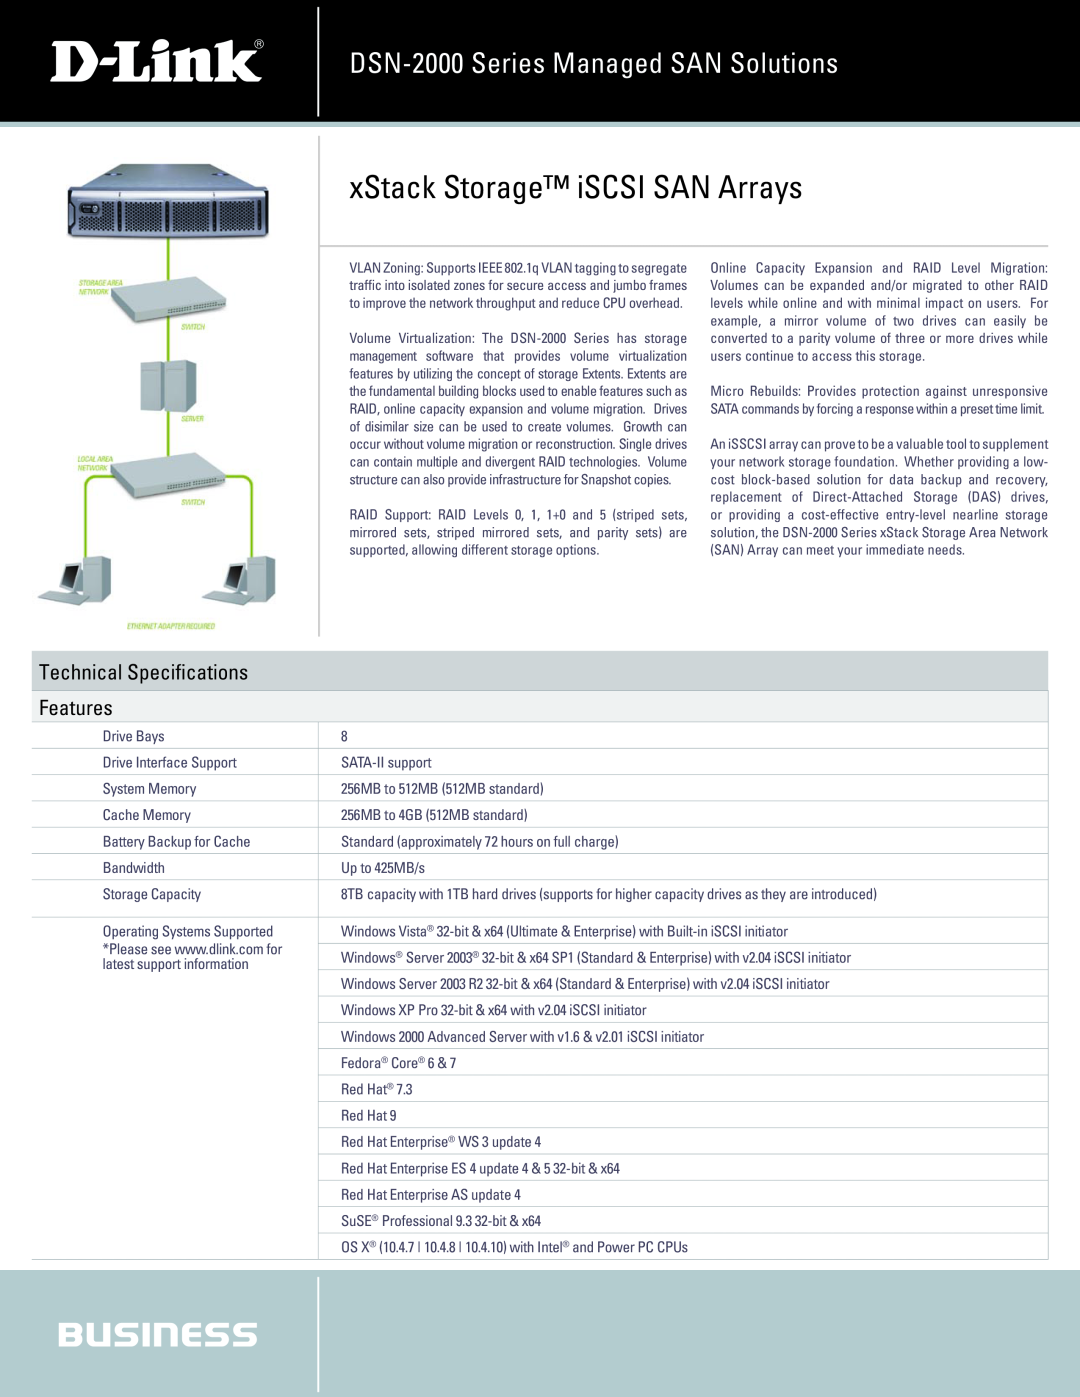 D-Link manual Technical Specifications Features, xStack Storage iSCSI SAN Arrays, DSN-2000 Series Managed SAN Solutions 